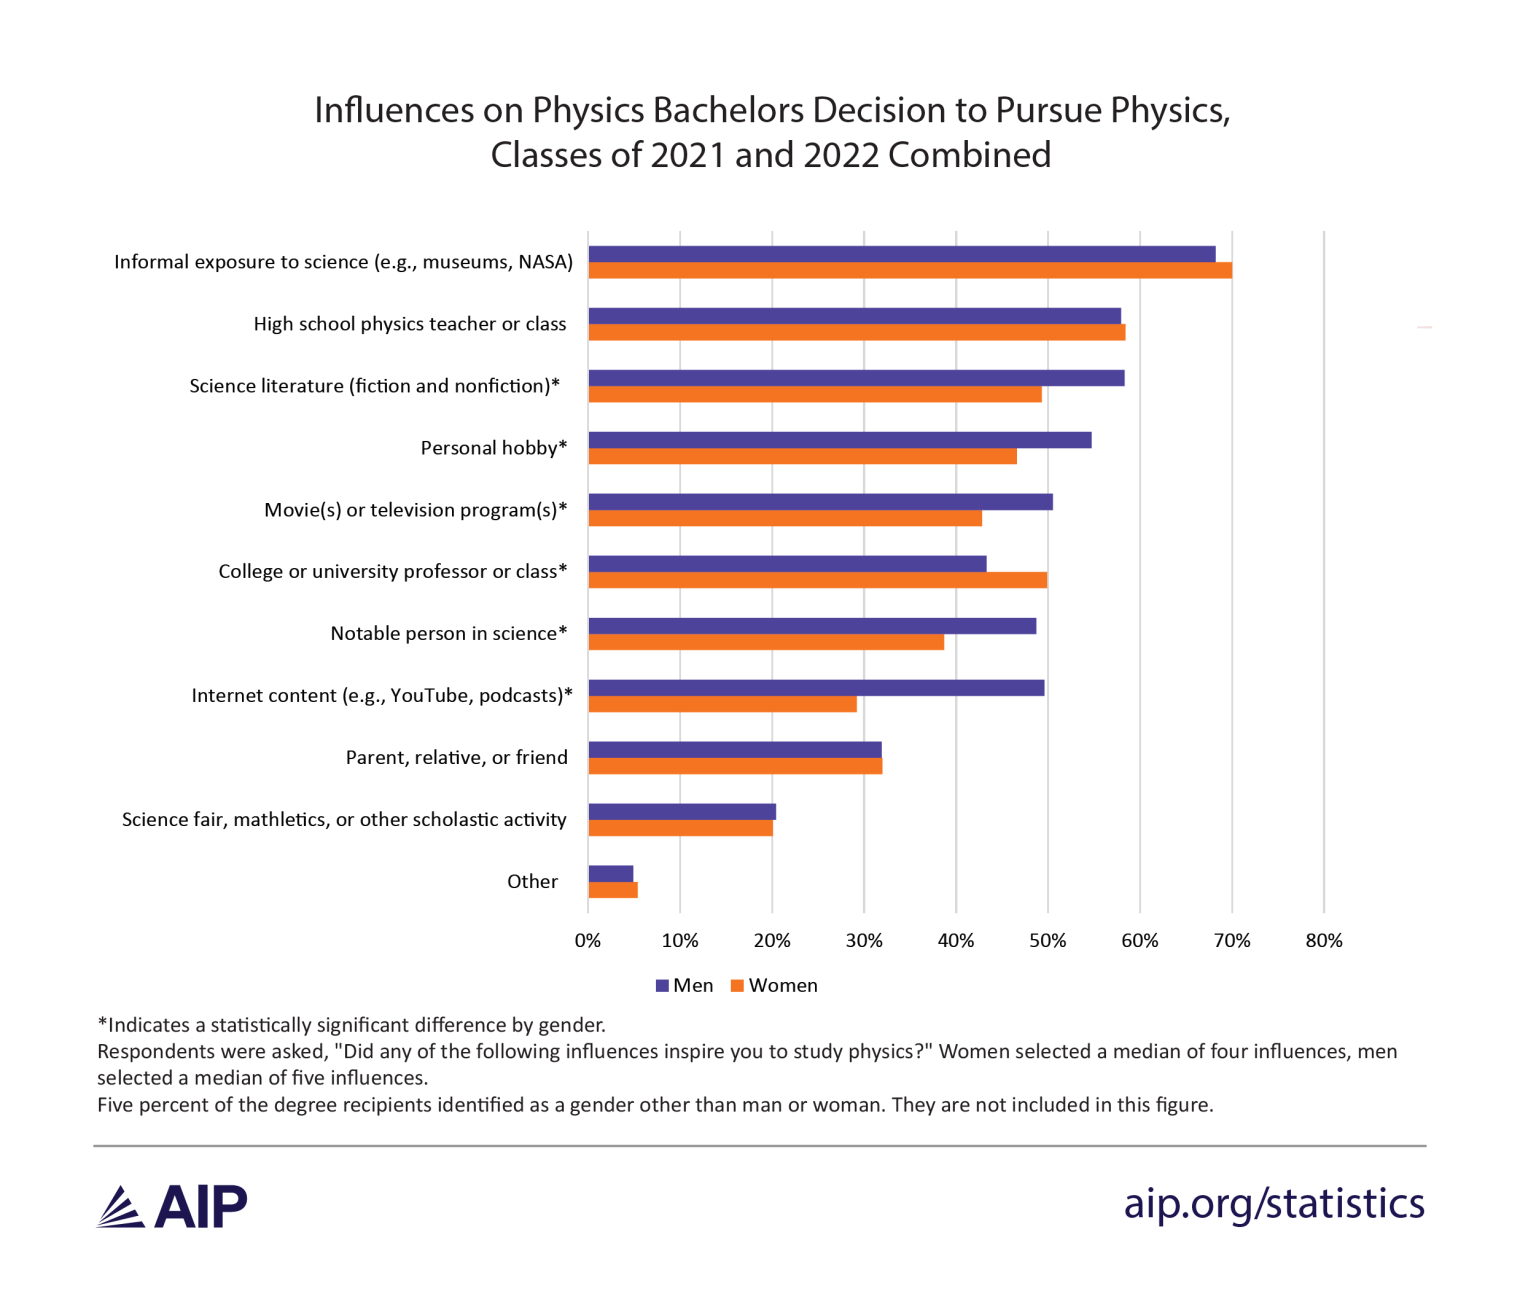 Influences on Physics Bachelors Decision to Pursue Physics, Classes of 2021 and 2022 combined. Similar proportions of men and women reported being influenced by informal exposure to science, high school physics, and parents or relatives.